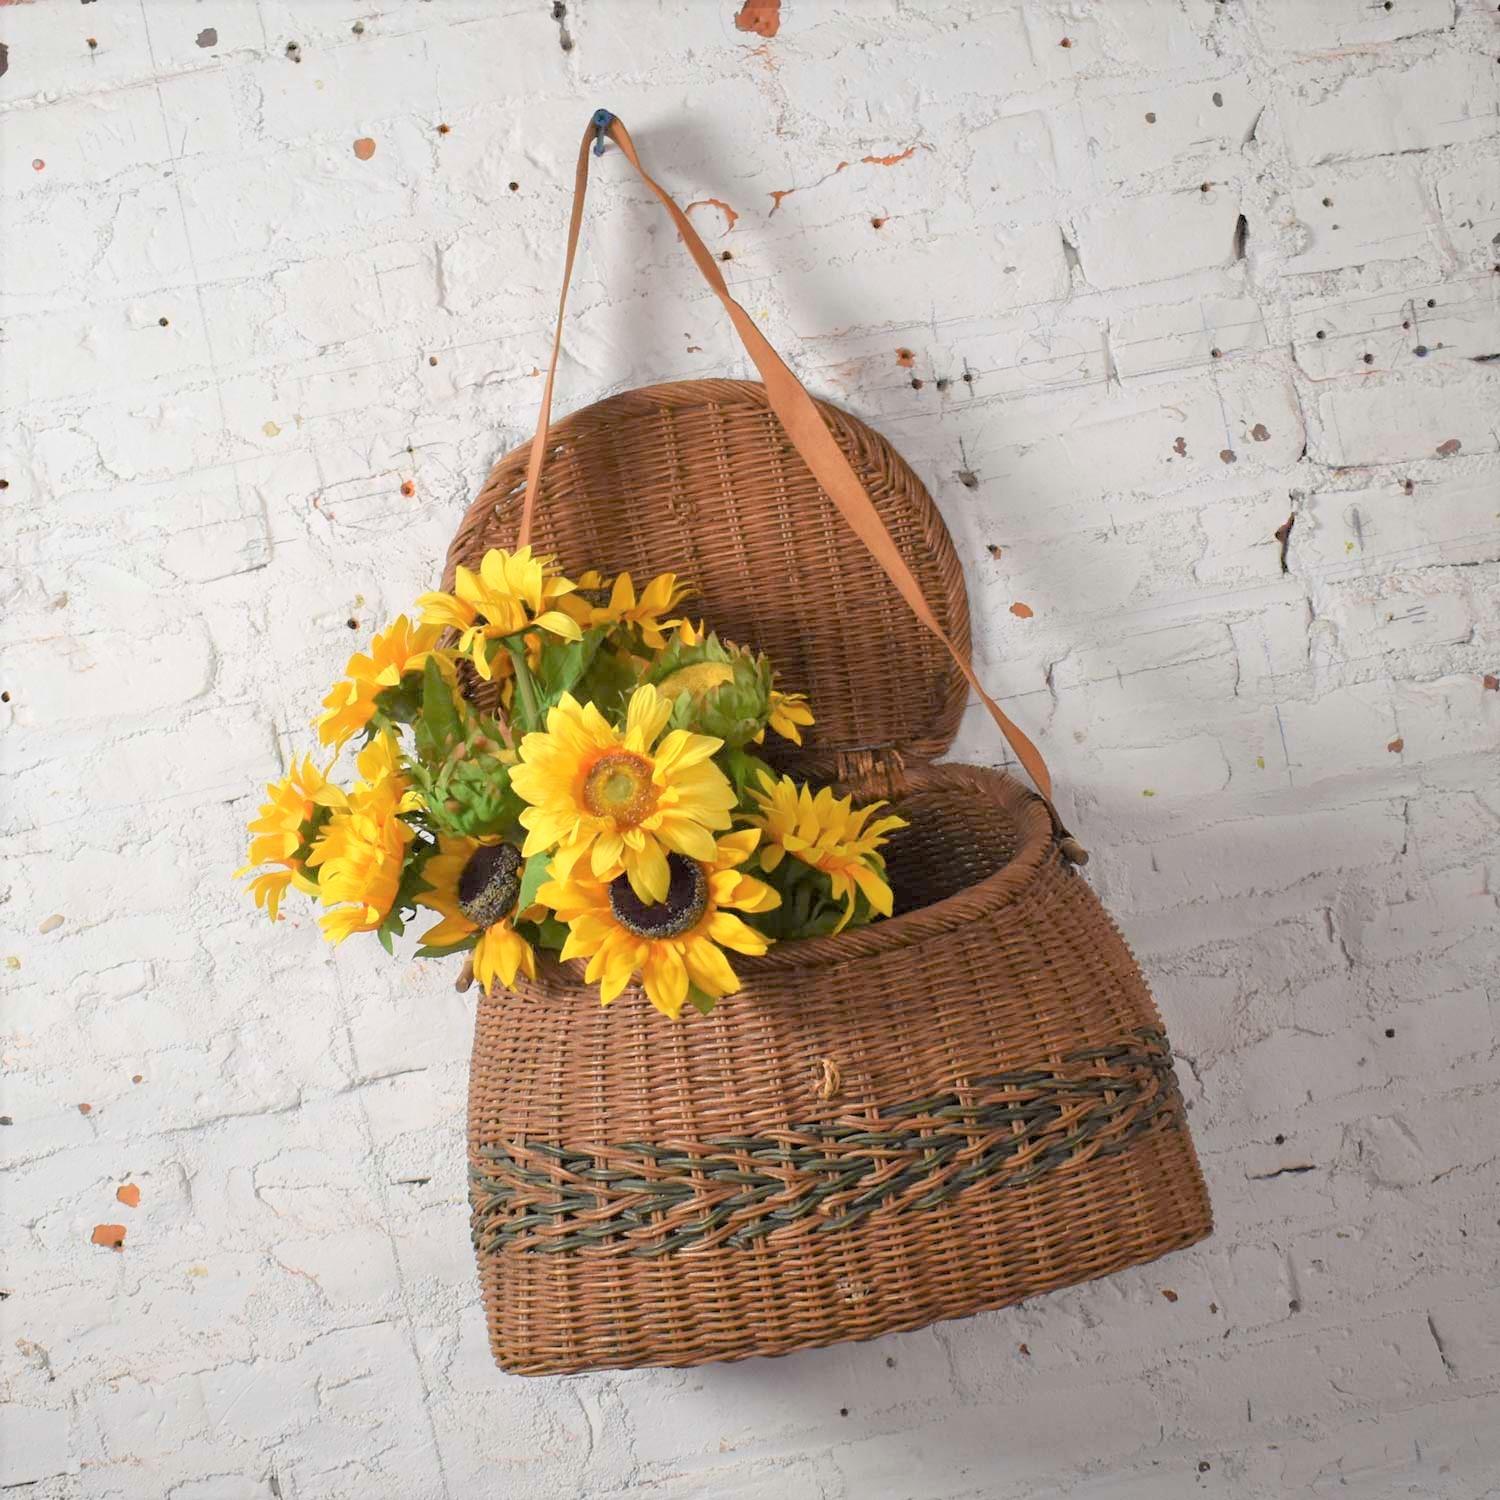 Fascinating antique wicker basket fishing creel with a leather strap handle. It is in wonderful vintage condition. We have not found any breaks in the wicker; however, there is no latch to fasten the lid. It has a beautiful age patina. Please see